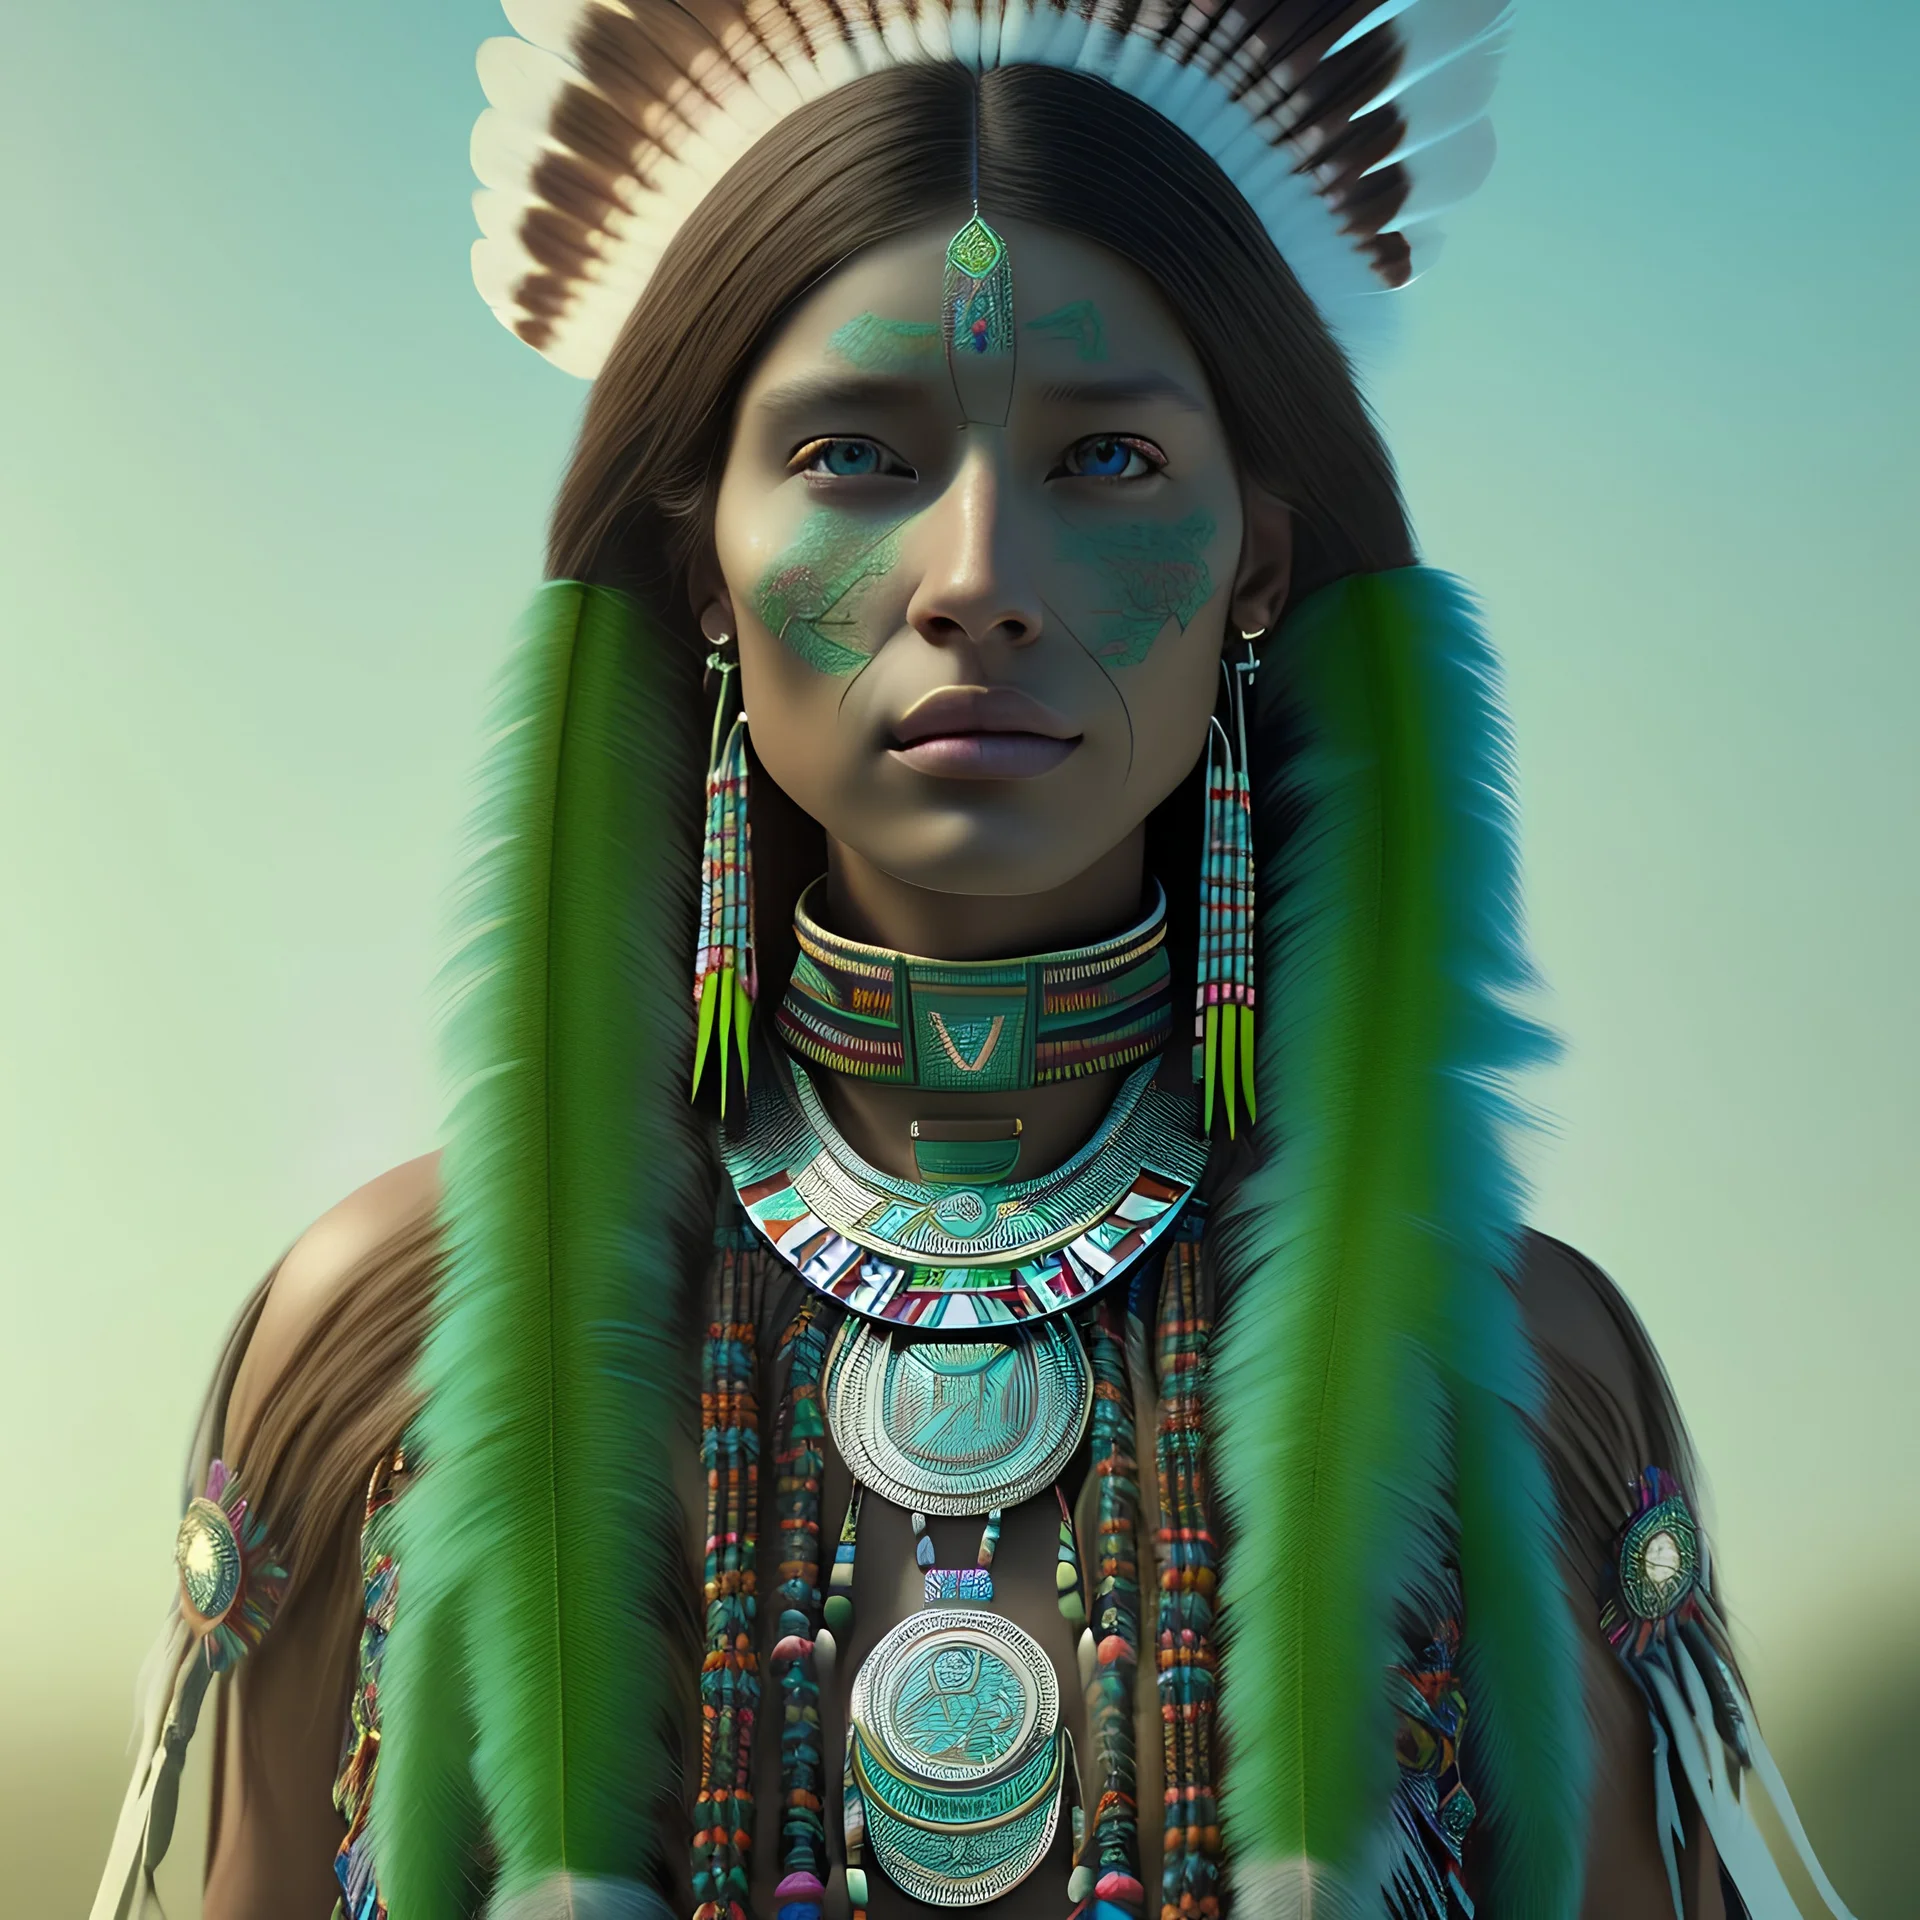 New Mexico pueblo Indian female, pueblo indian, 12k, ultra high definition, finely tuned detail, unreal engine 5, octane render, ultra realistic face, realistic headress, detailed make-up, green chile, zia, detailed turquoise jewelry, detailed hair, detailed feathers, green chile background